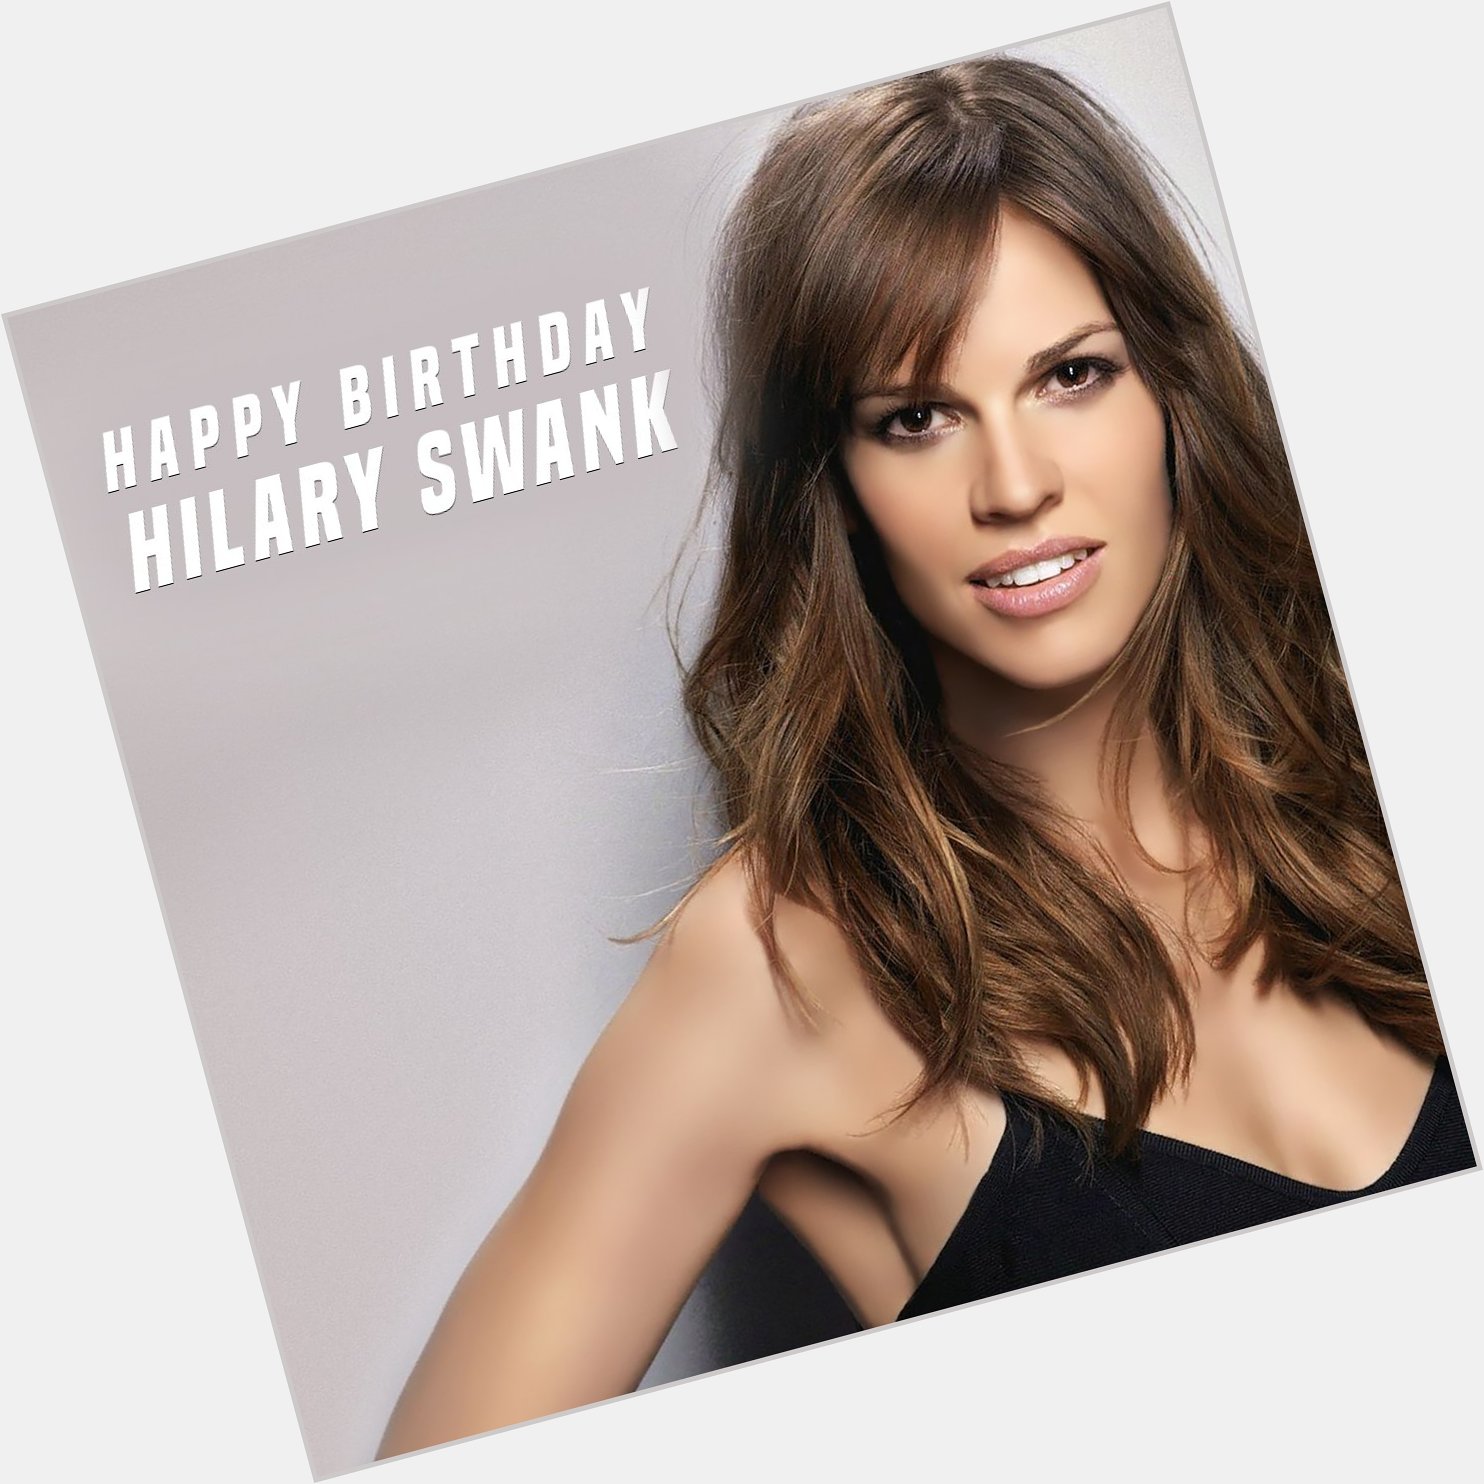 Happy Birthday Hilary Swank! Don\t miss her in - in theatres August 18! 